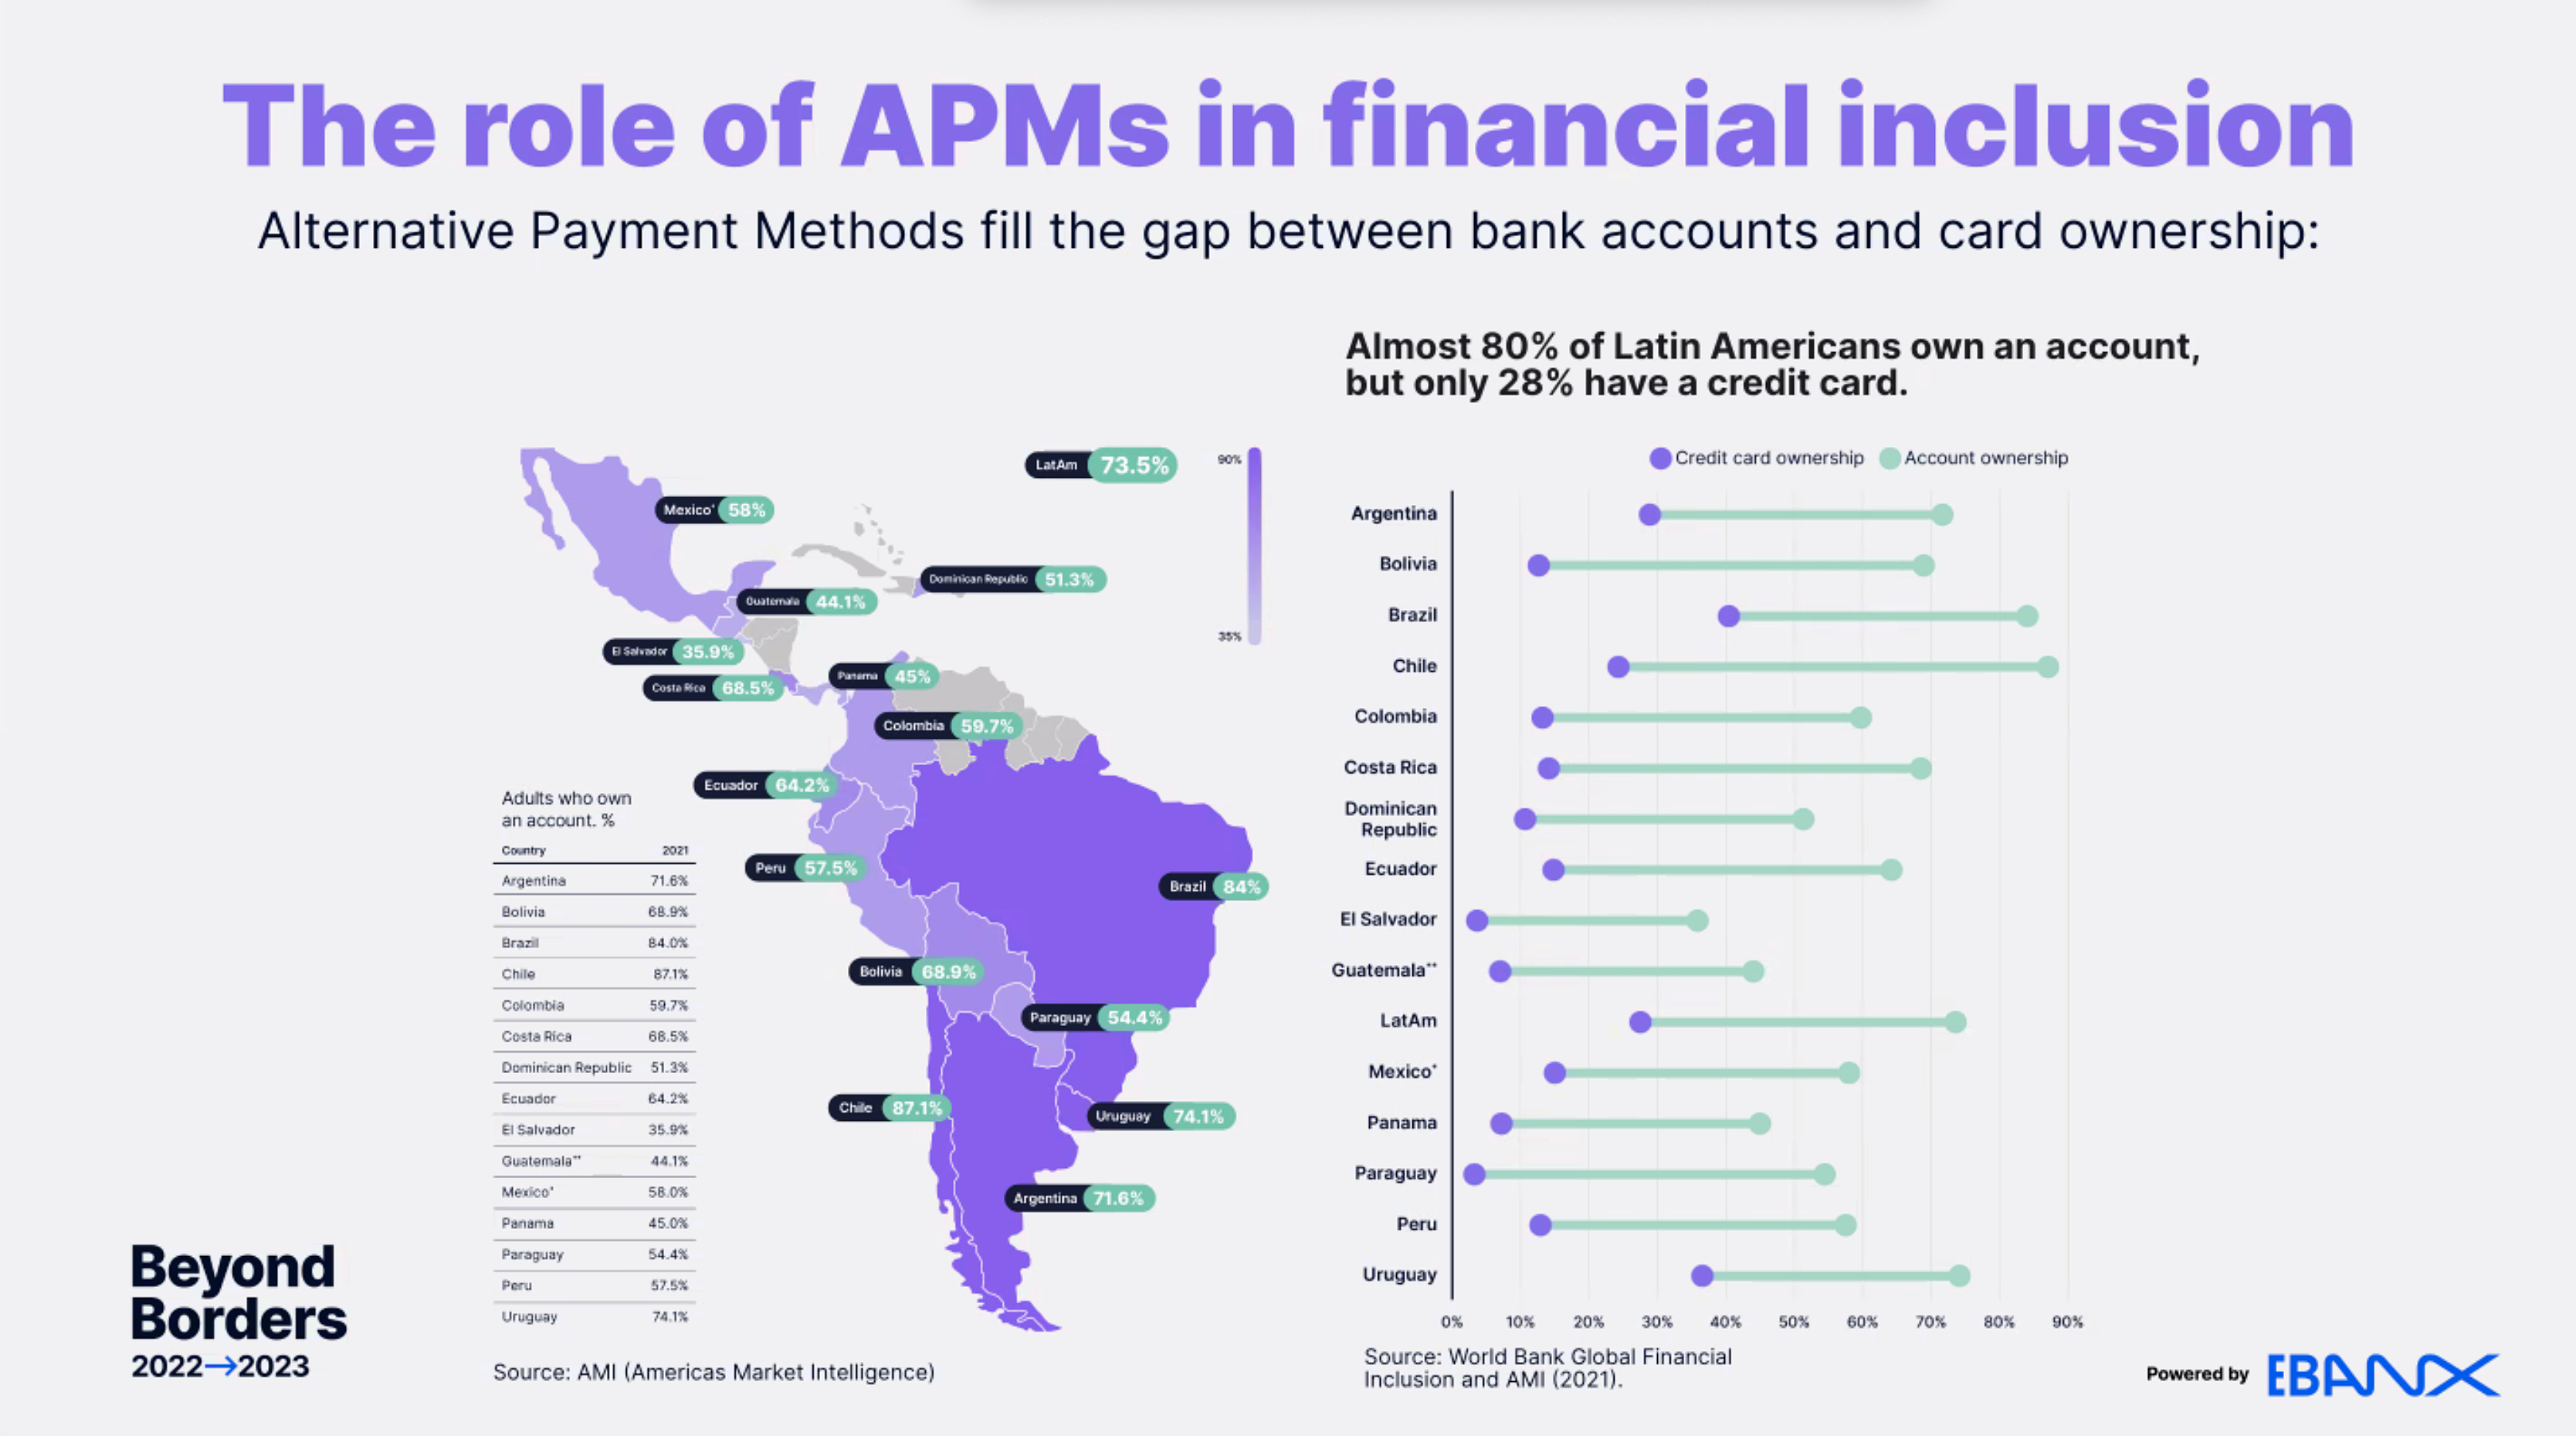 The role of APMs in financial inclusion